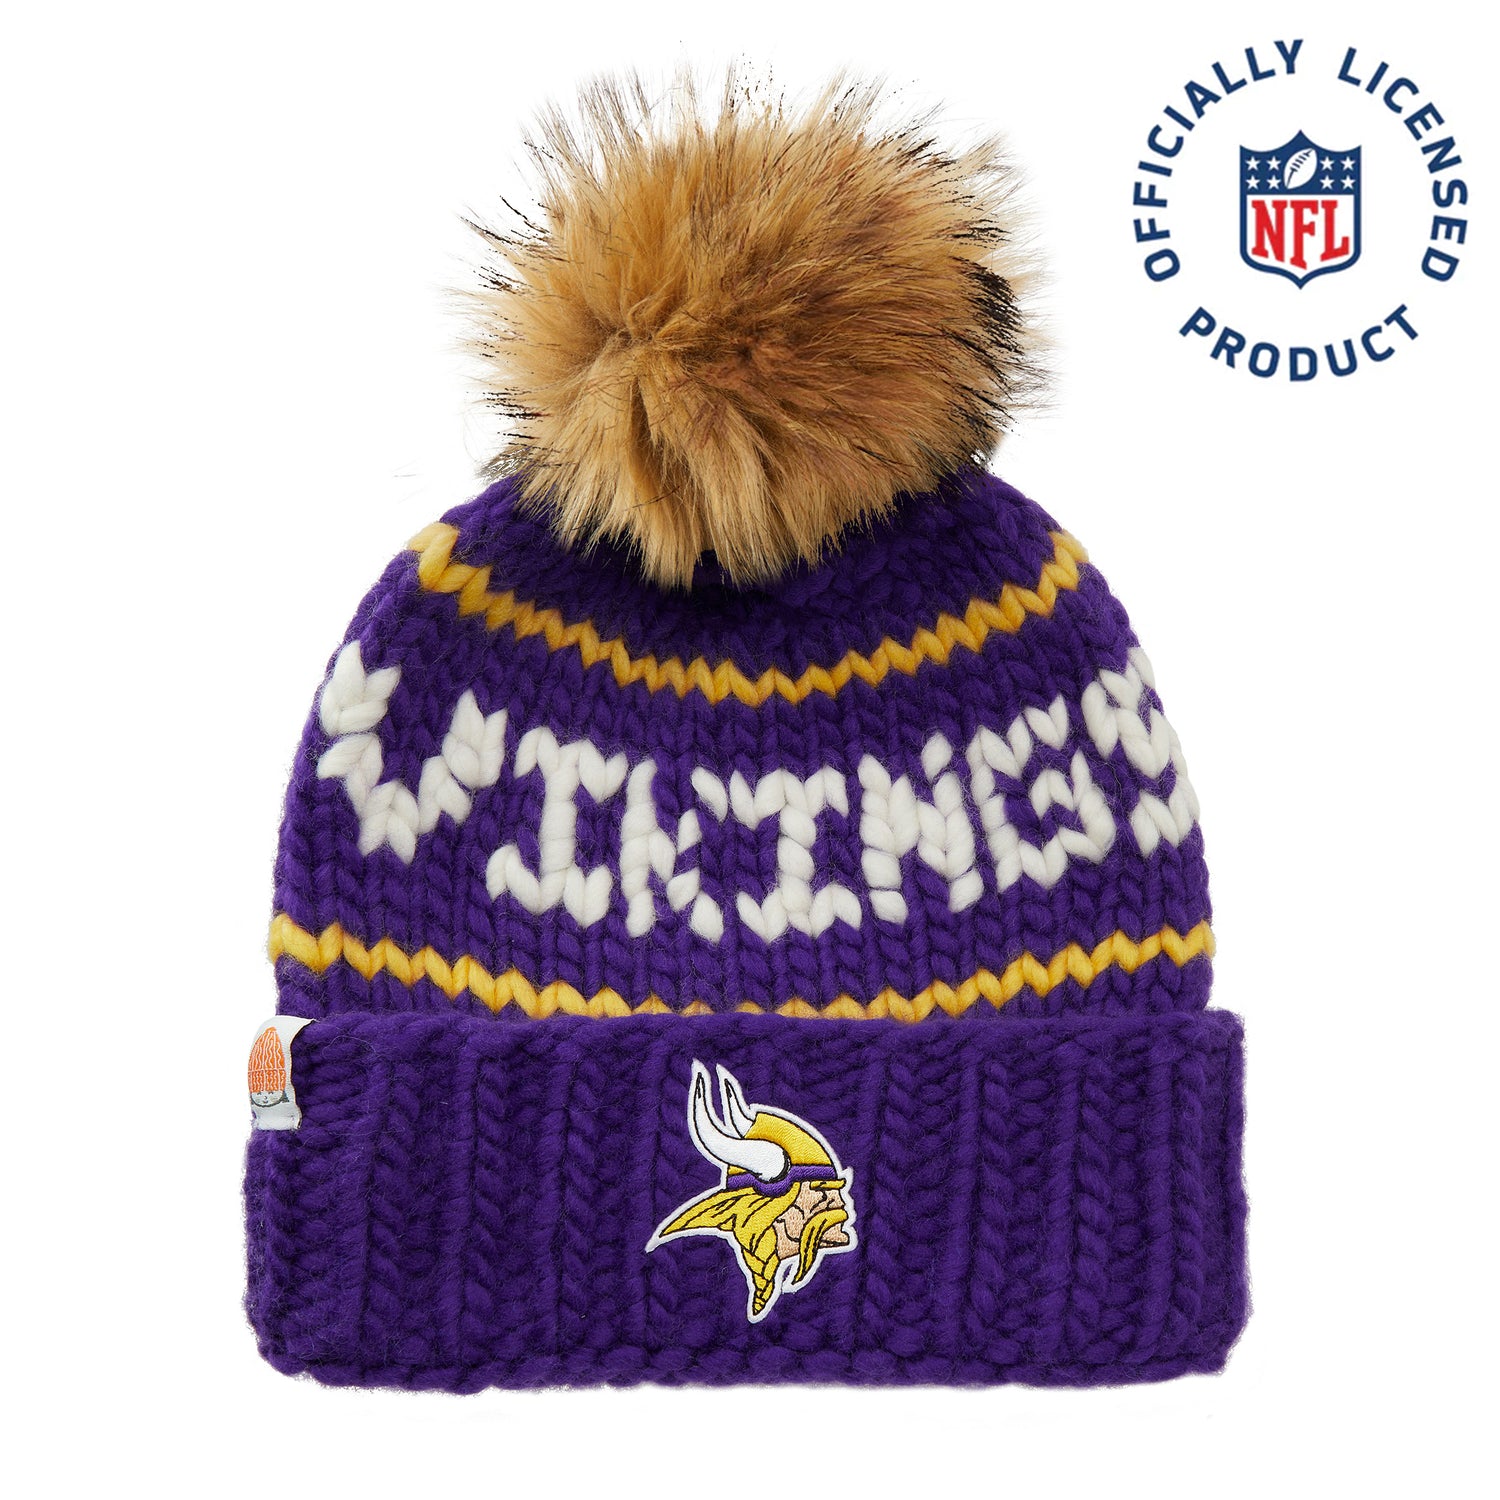 The Vikings NFL Beanie with Faux Fur Pom